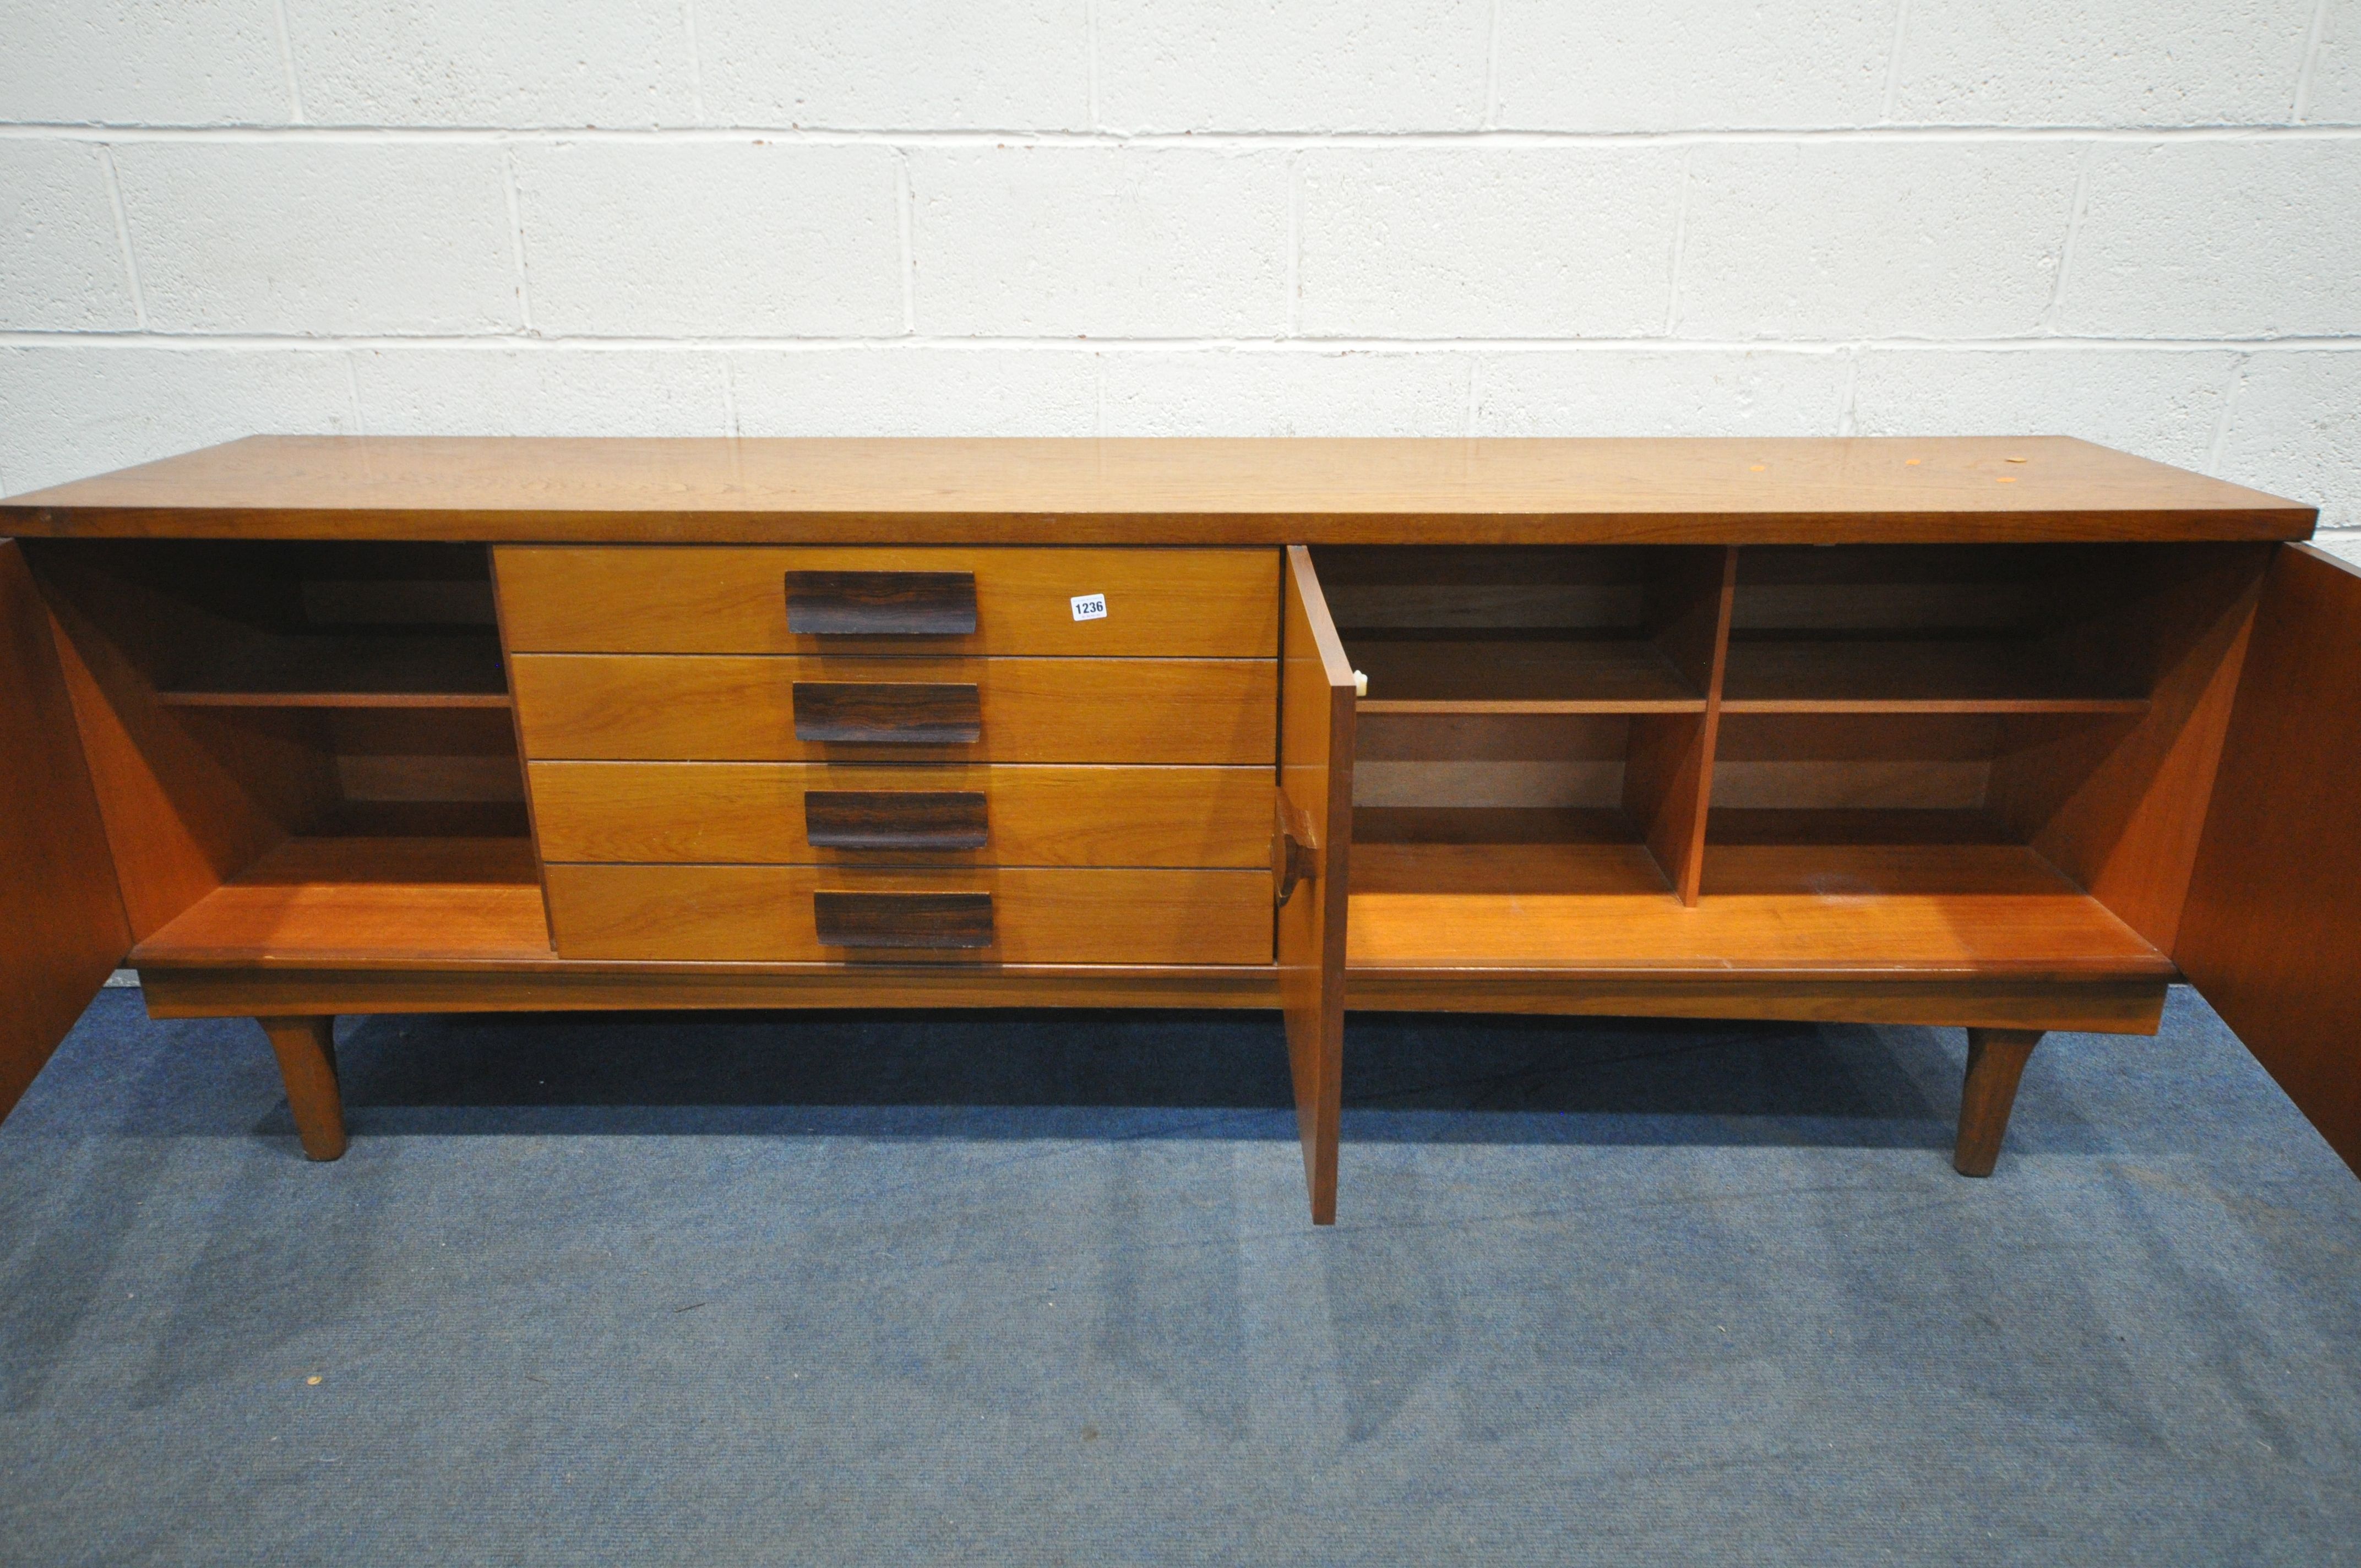 A BATH CABINET MAKERS 1960'S TEAK SIDEABOARD, with a single and double cupboard doors that a both - Image 3 of 3